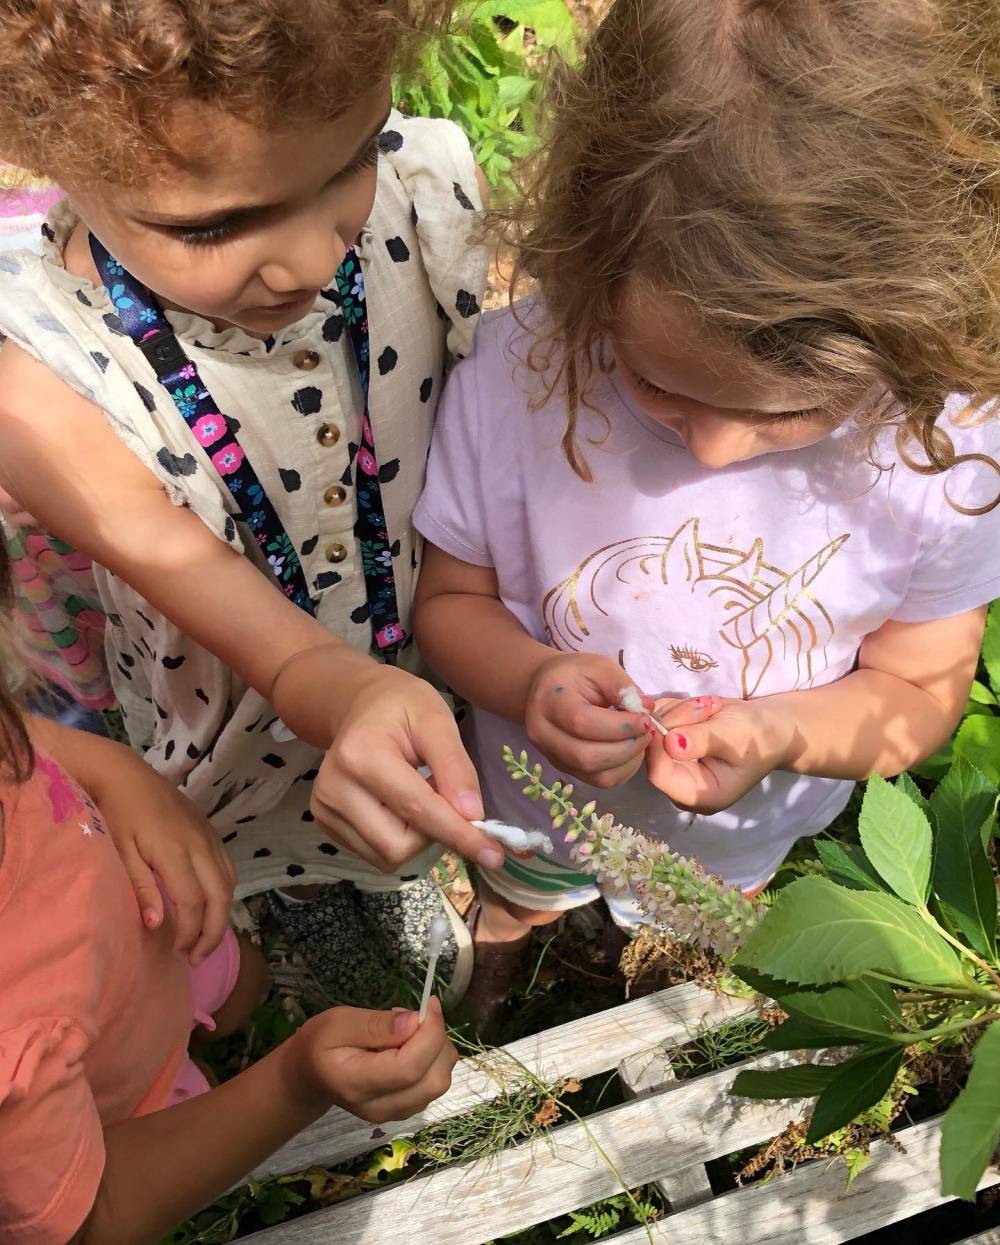 TOP NEW JERSEY WILDERNESS CAMP: Cora Hartshorn Nature Discovery  is a Top Wilderness Summer Camp located in Short Hills New Jersey offering many fun and enriching Wilderness and other camp programs. 